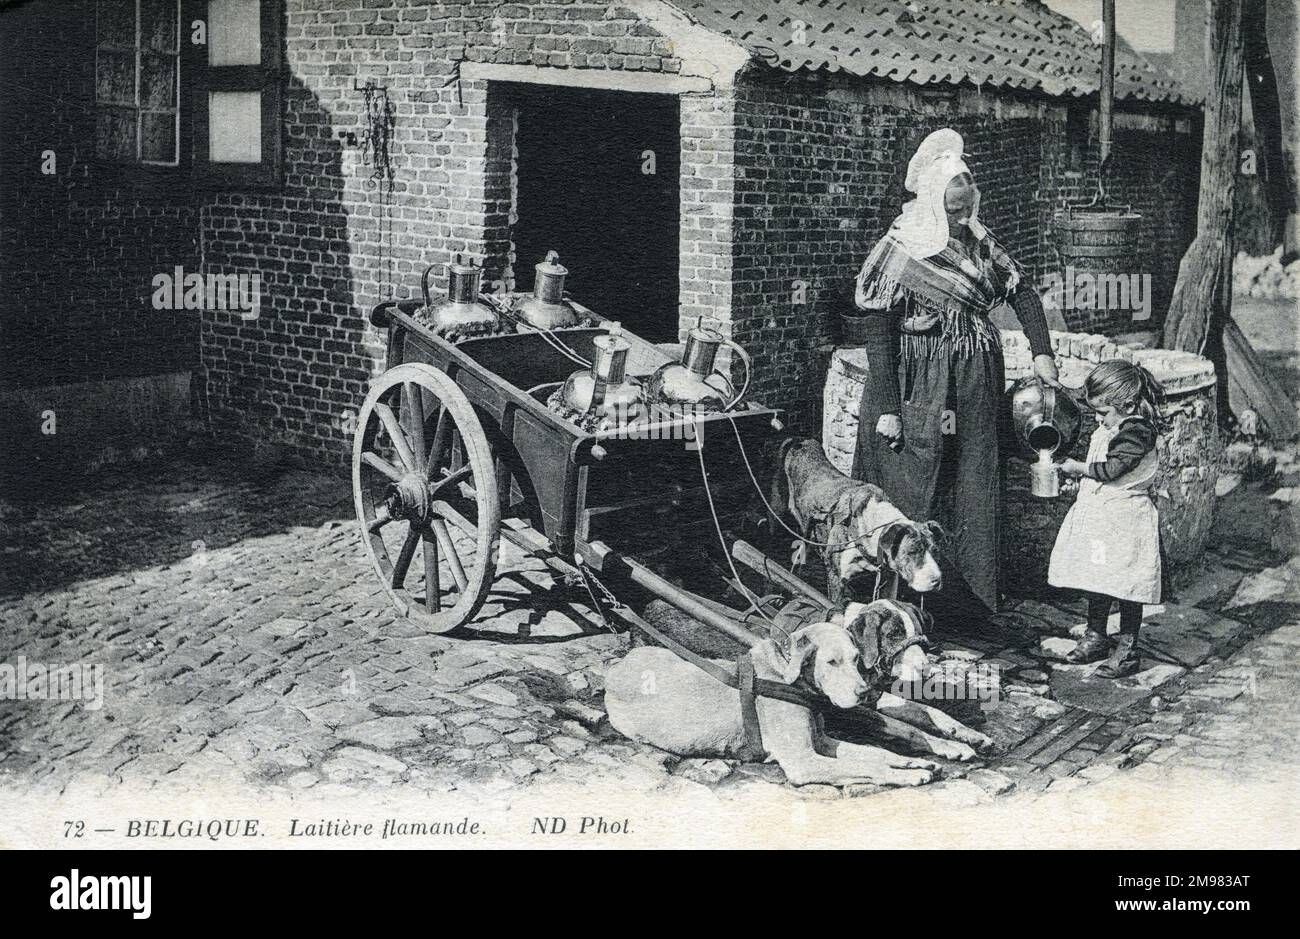 Belgium - Flemish Milkmaid with her Dog-drawn milk cart - pouring a mug of the white stuff for a young girl. Stock Photo